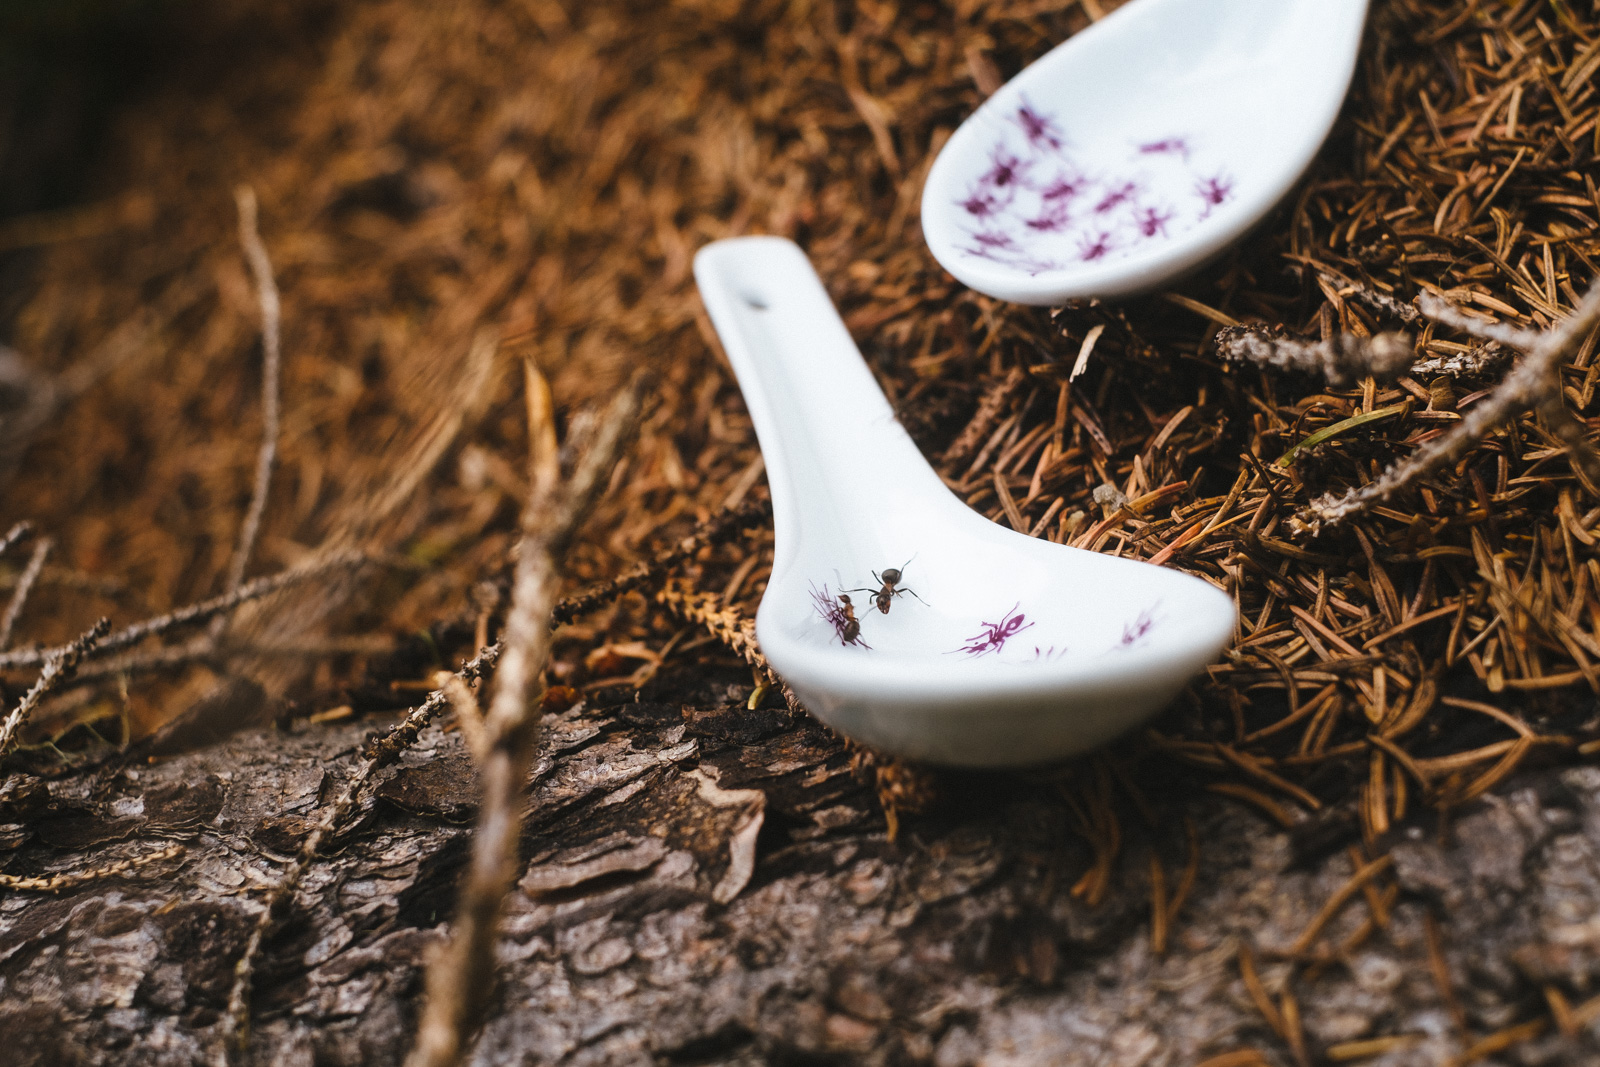 “Ant Violet” spoons from “Fourmis”, a collection of painted porcelains by messalyn, disposed on an anthill in a forest.